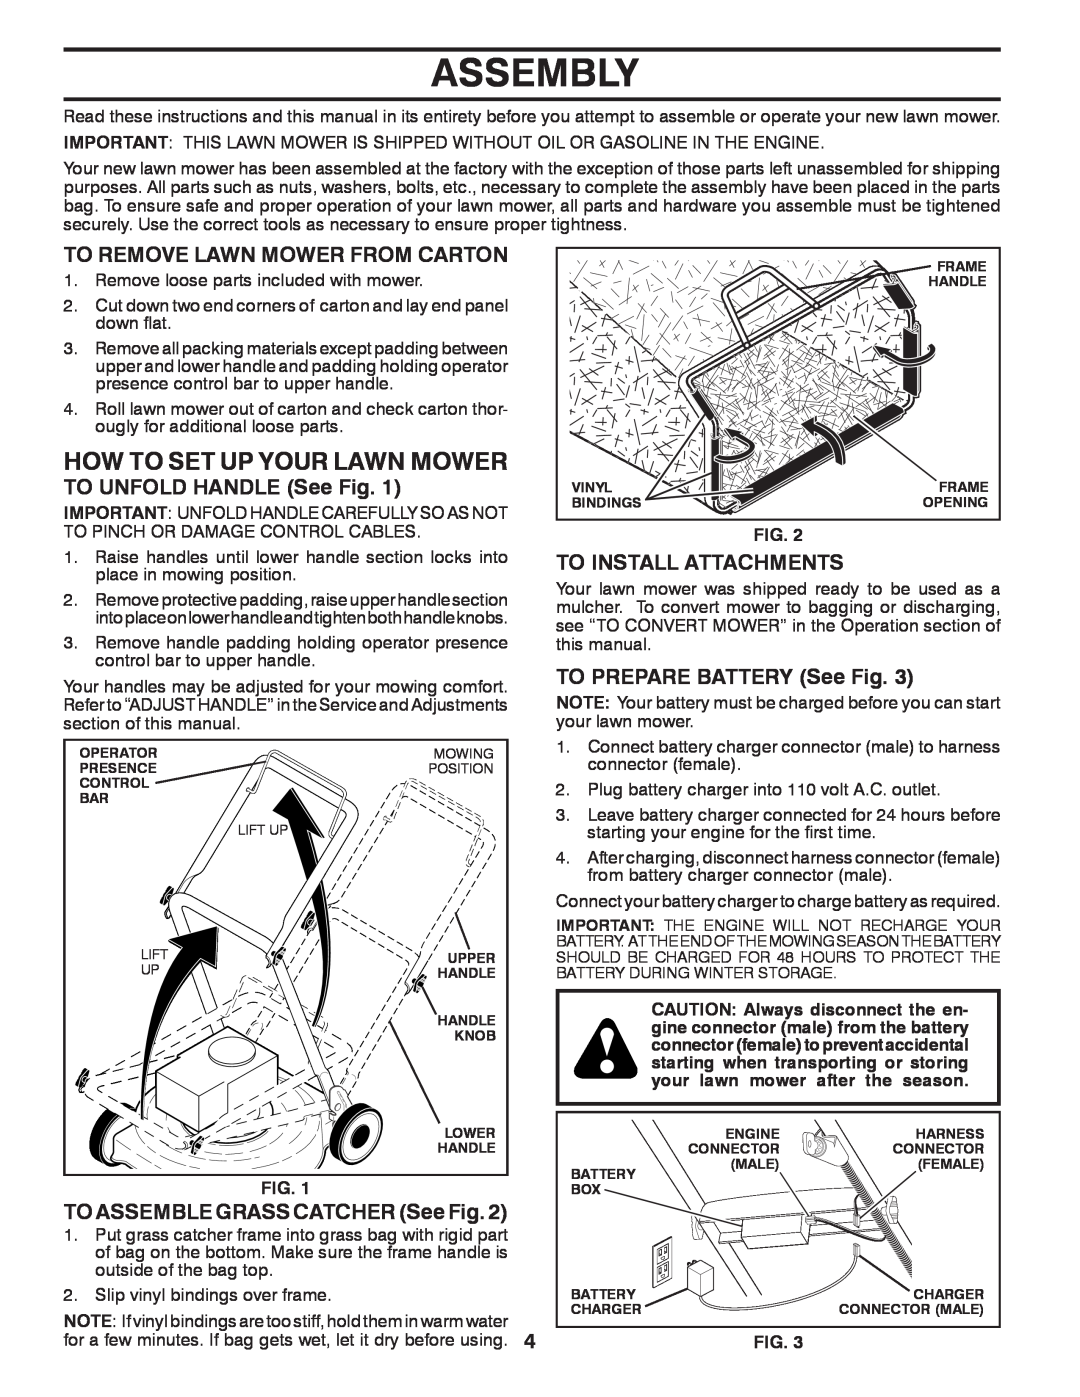 Husqvarna XT722FE owner manual Assembly, To Remove Lawn Mower From Carton, TO UNFOLD HANDLE See Fig, To Install Attachments 